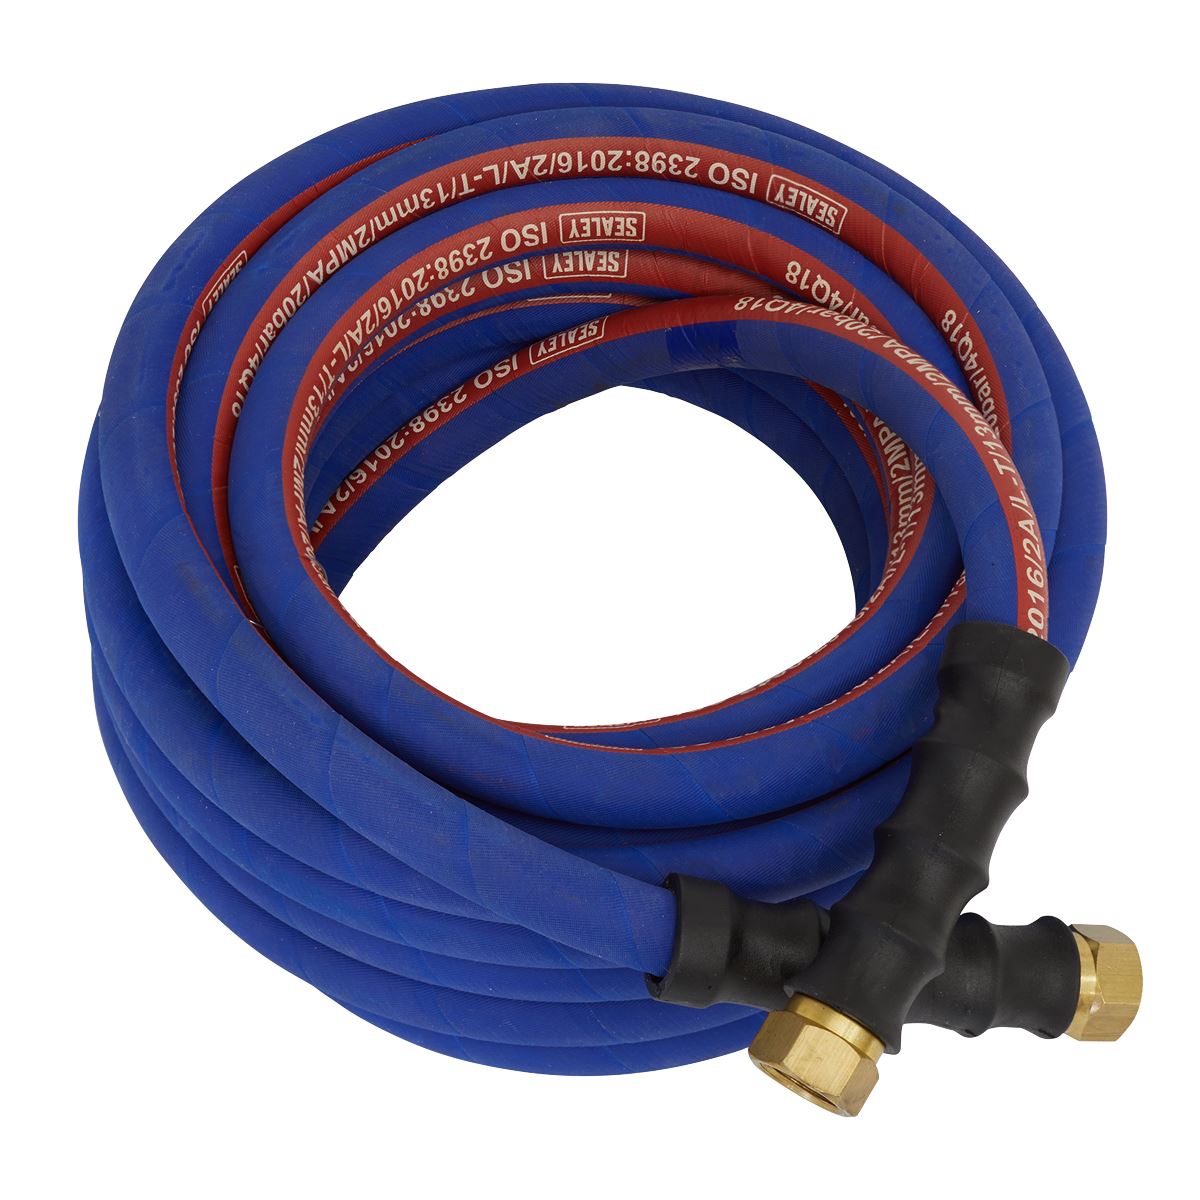 Sealey Air Hose 10m x Ø13mm with 1/2"BSP Unions Extra-Heavy-Duty